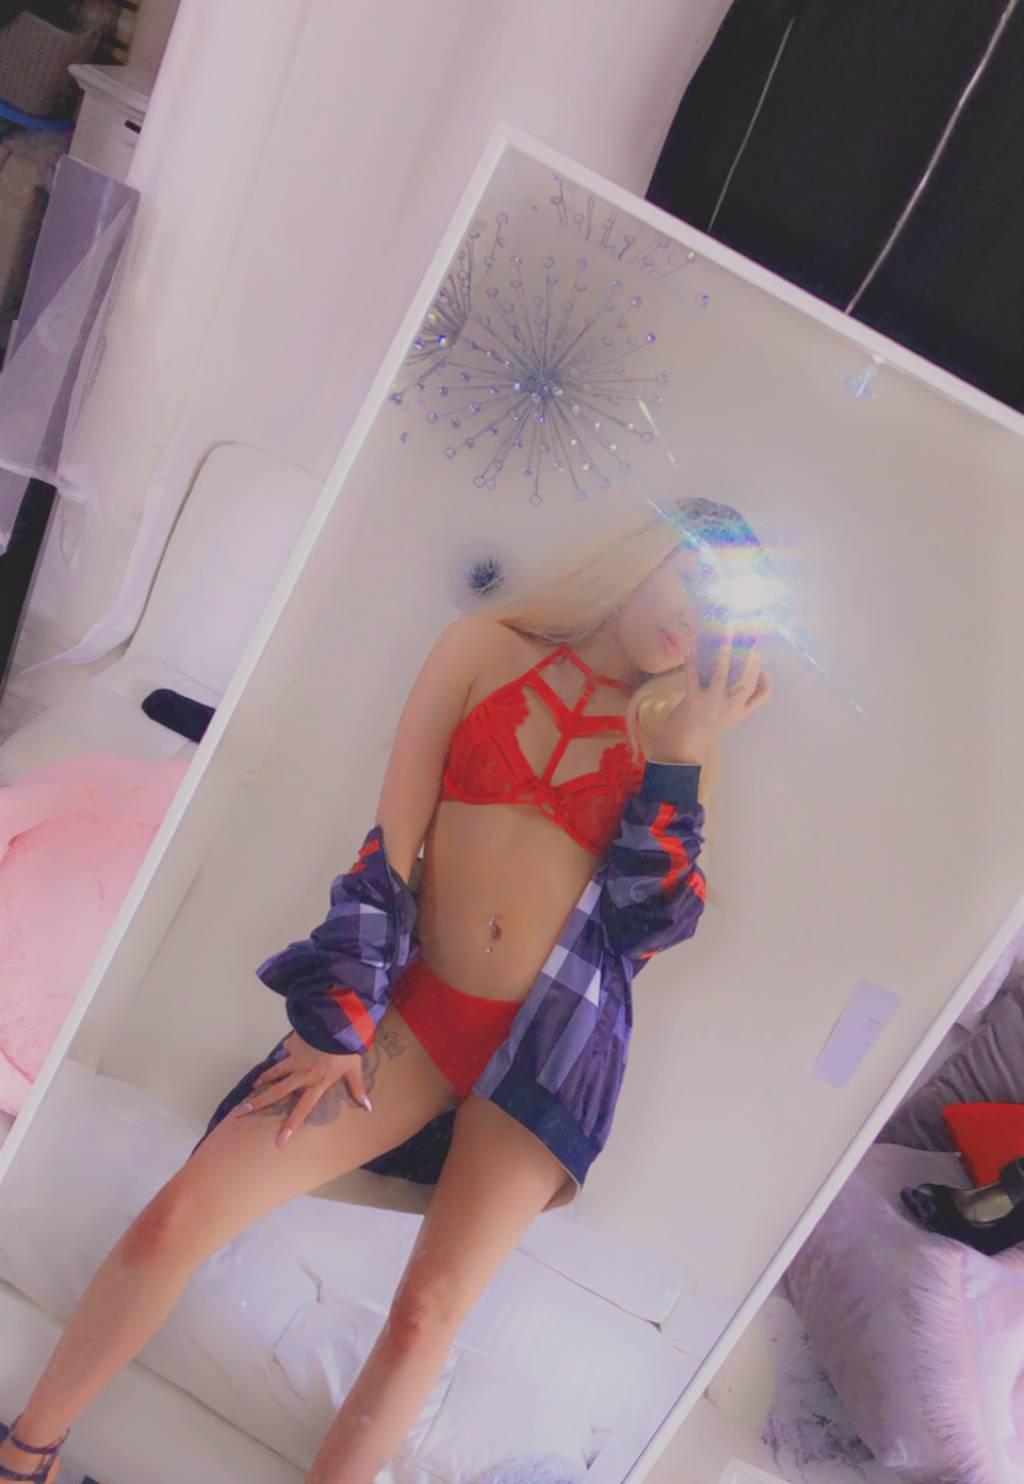 ♡ - Big booty, luscious lips, you can come & taste this